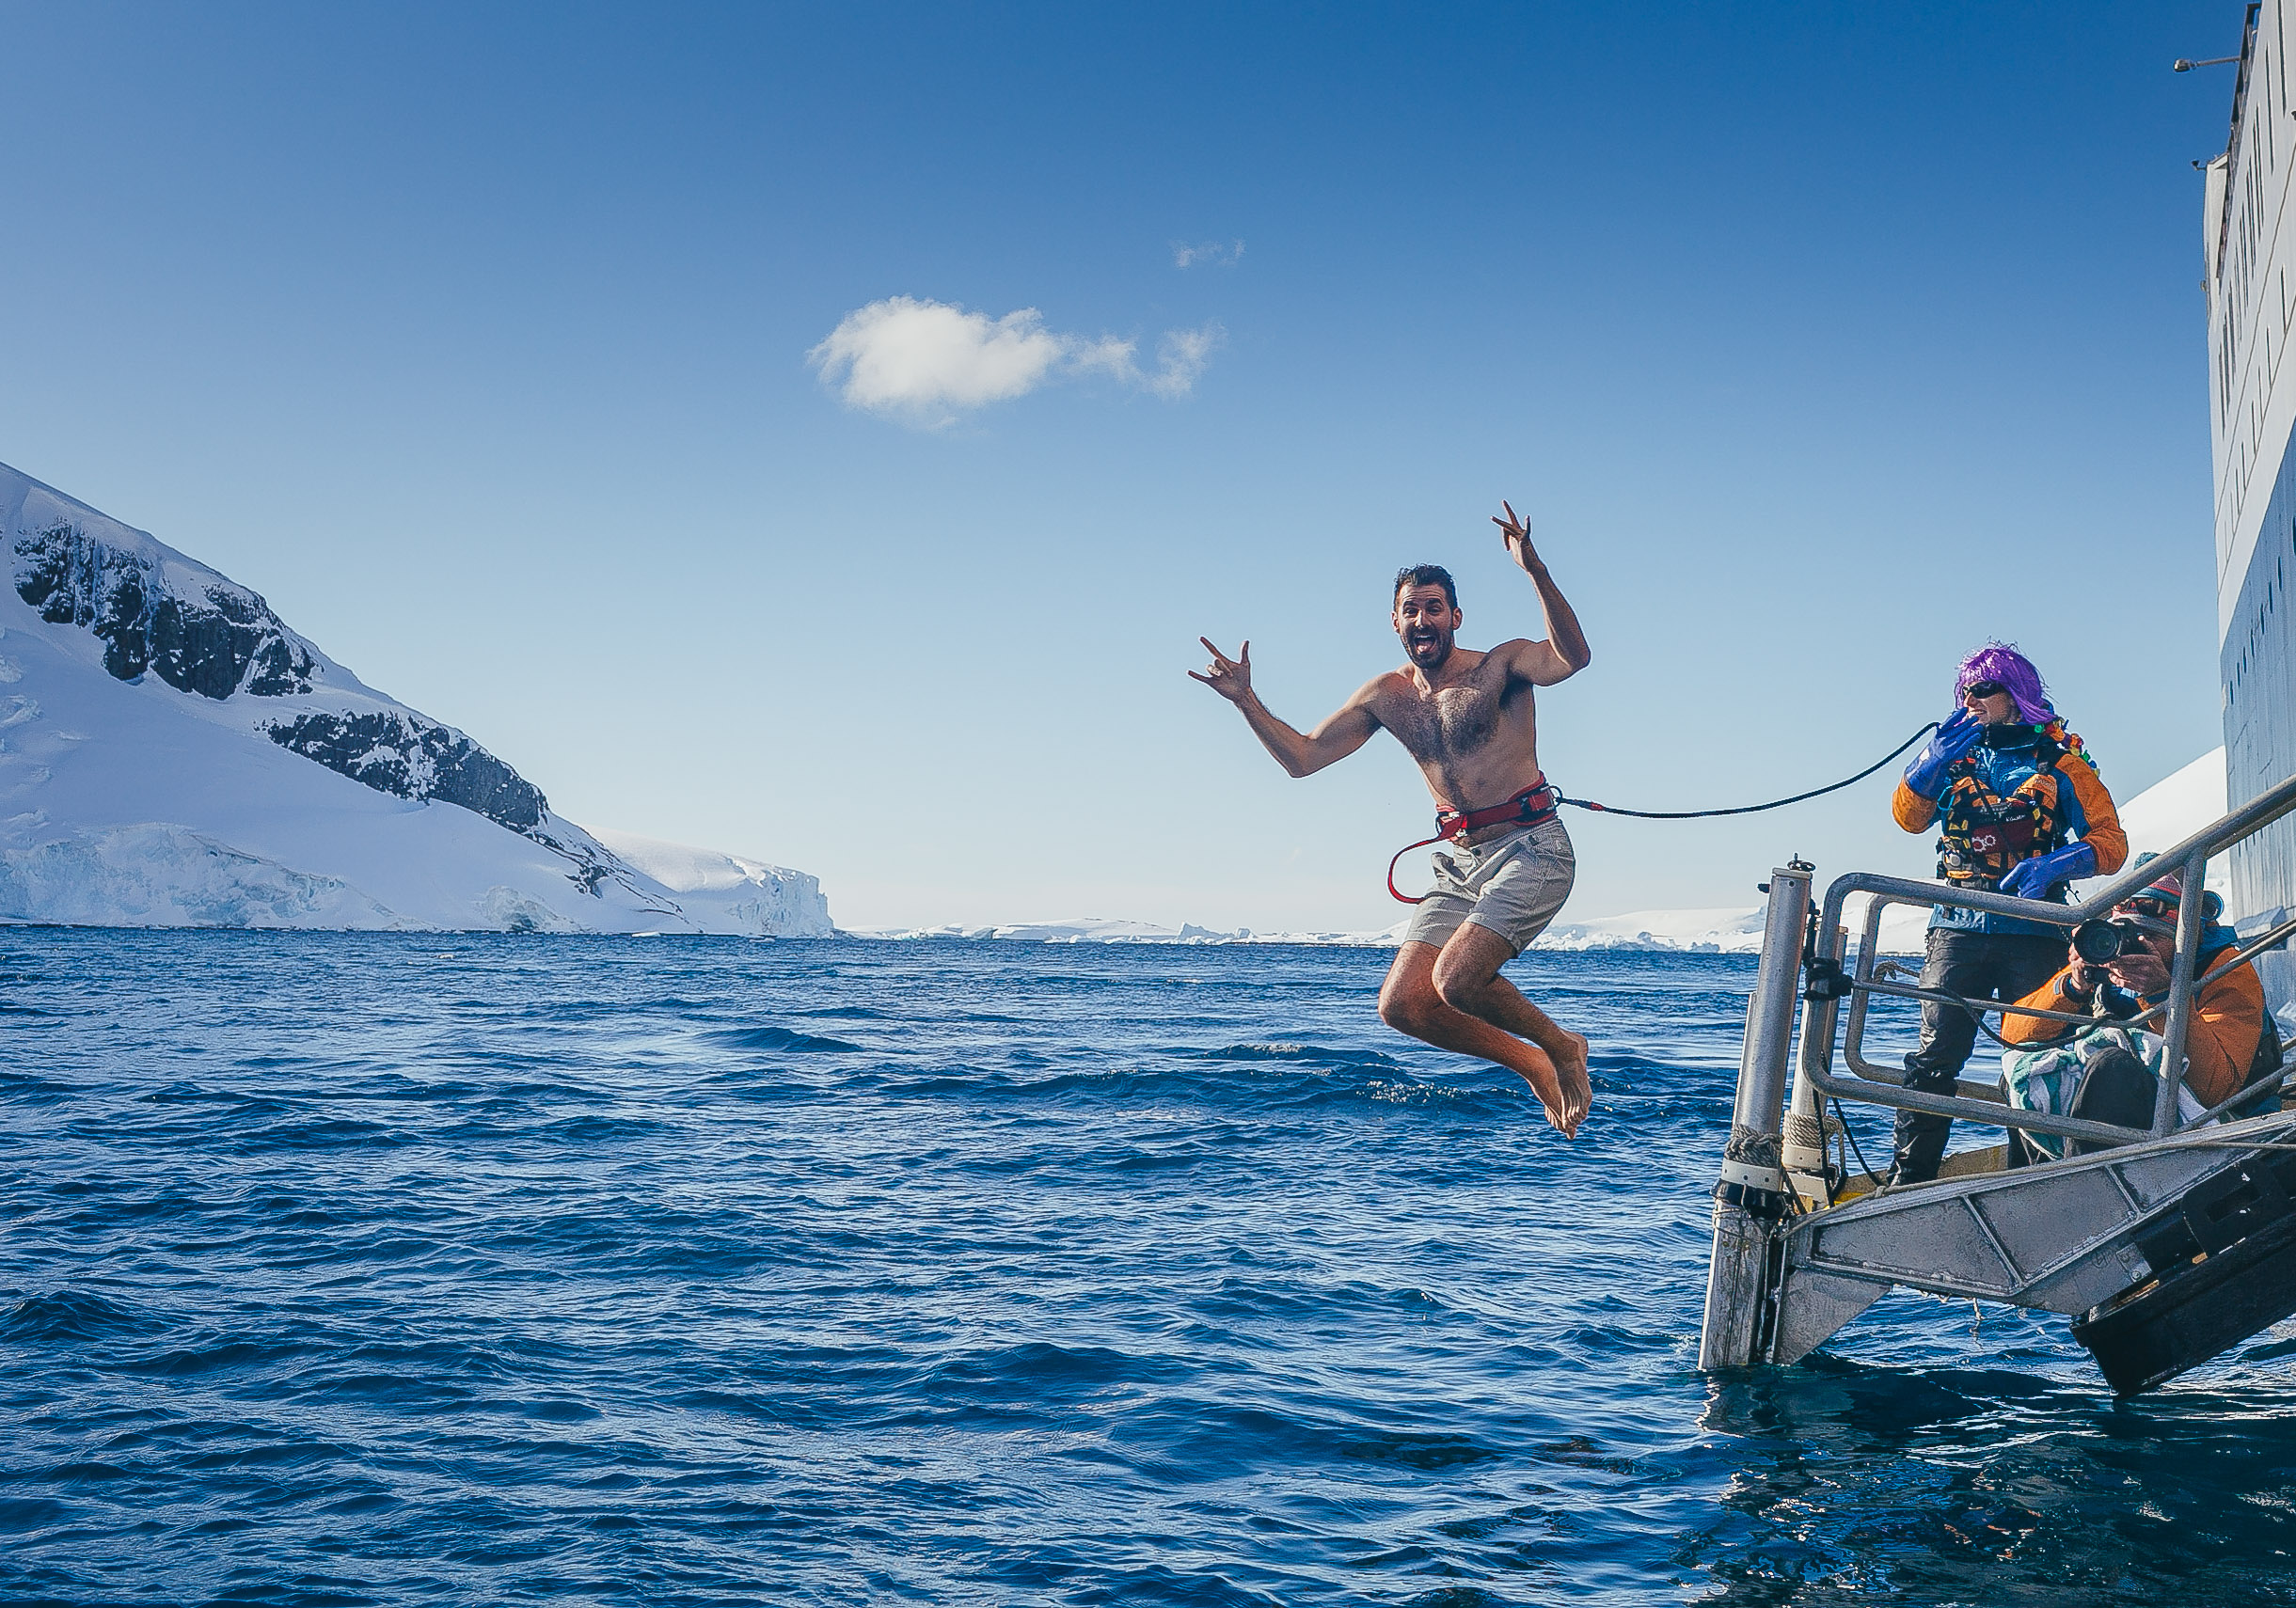 The Polar Plunge In Antarctica: How Bad Is It Really?